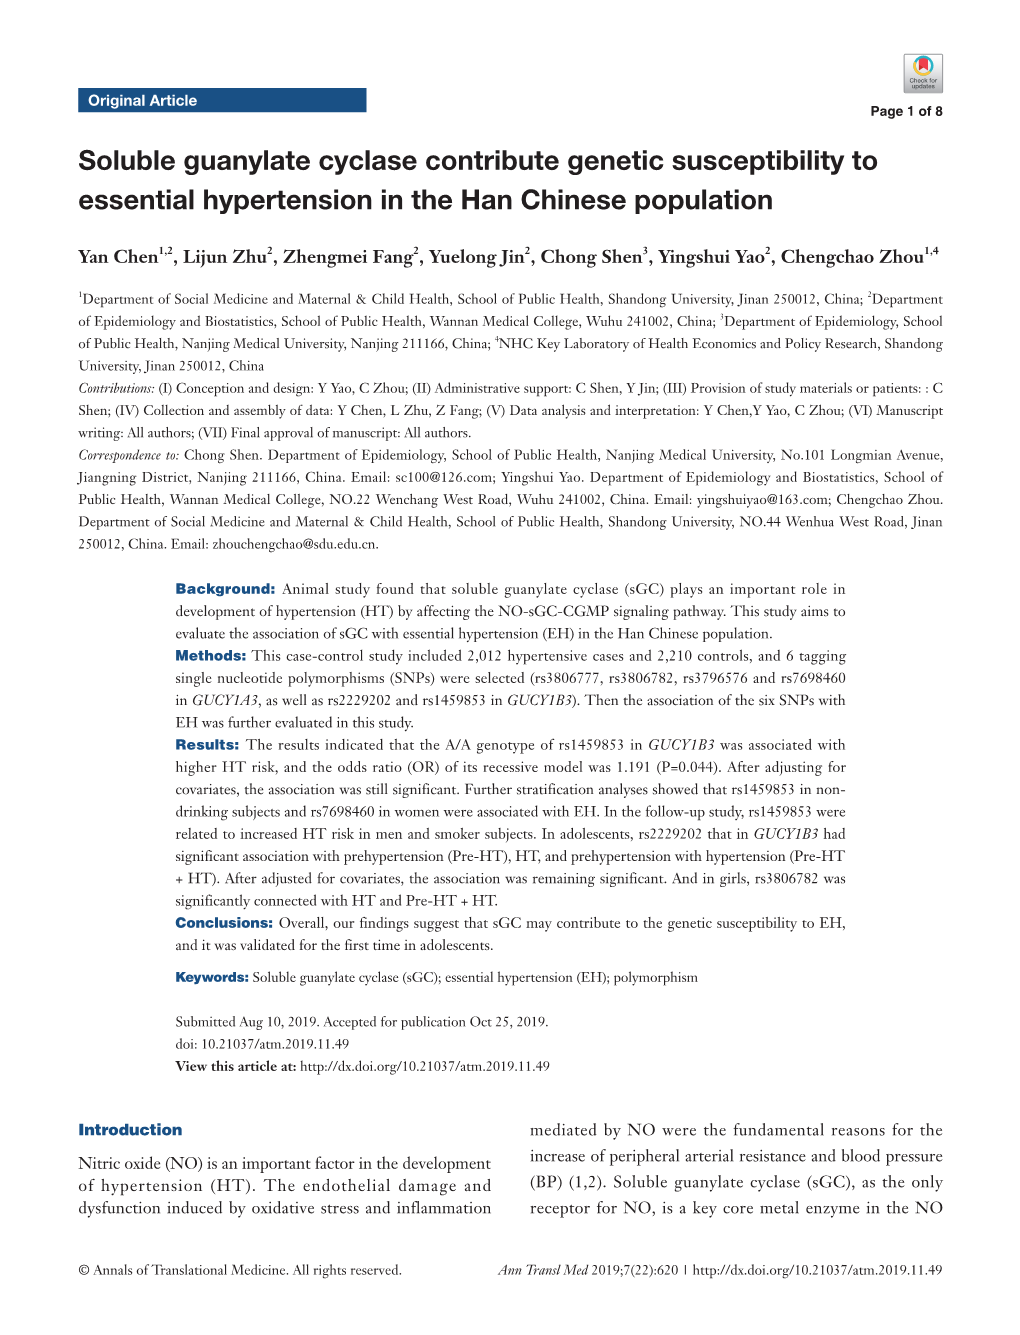 Soluble Guanylate Cyclase Contribute Genetic Susceptibility to Essential Hypertension in the Han Chinese Population